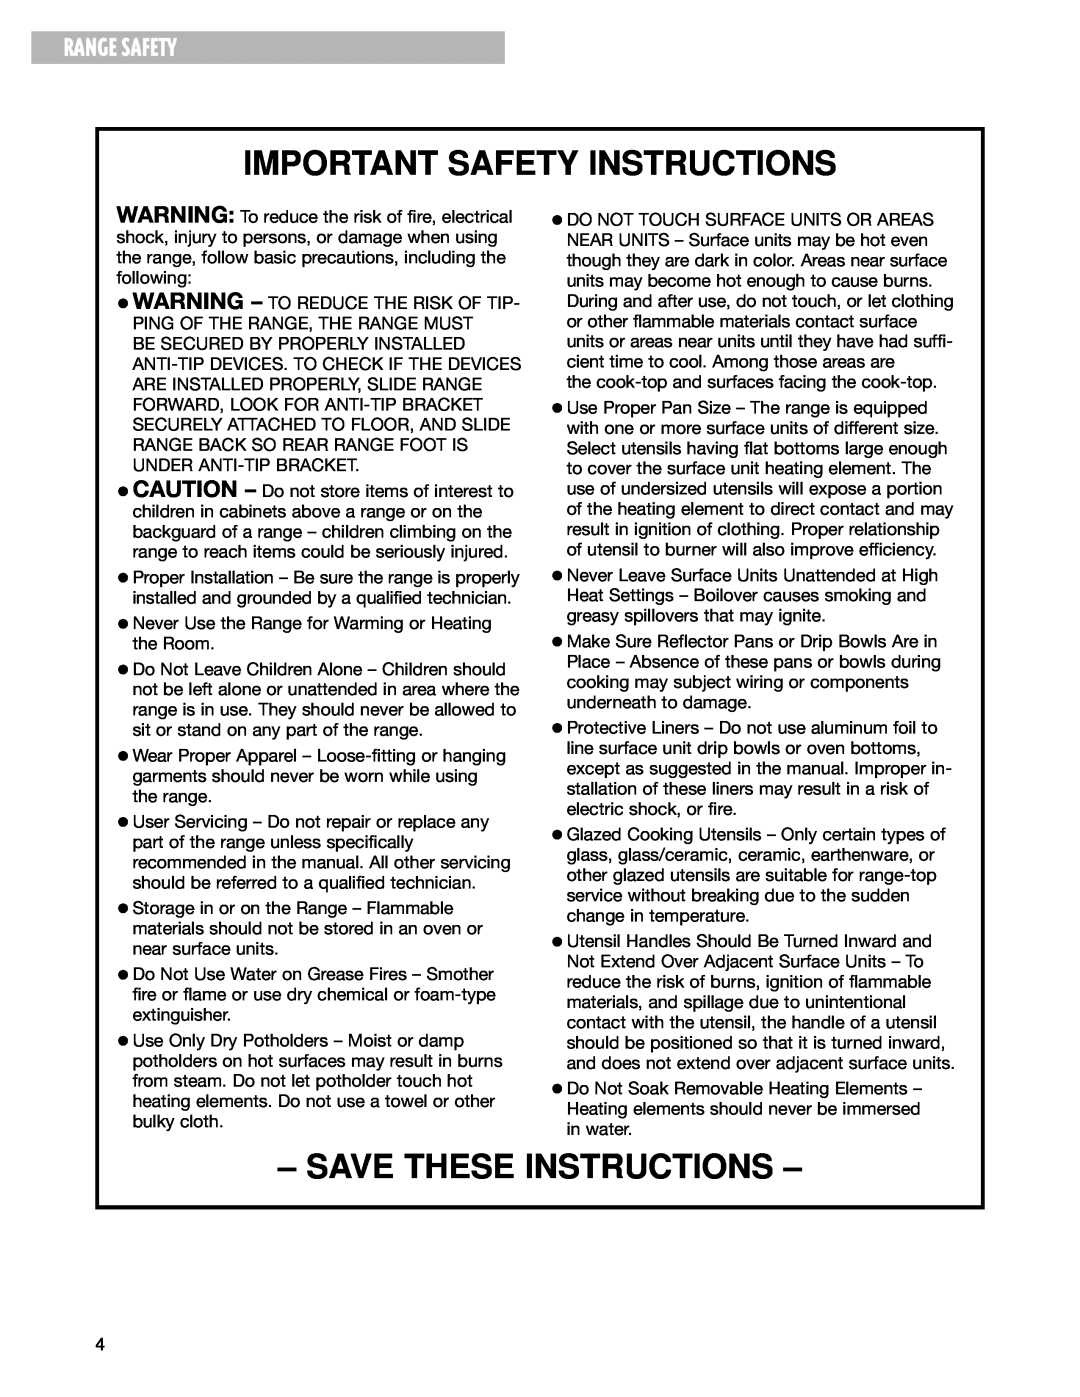 Whirlpool SES374H warranty Important Safety Instructions, Save These Instructions, Range Safety 